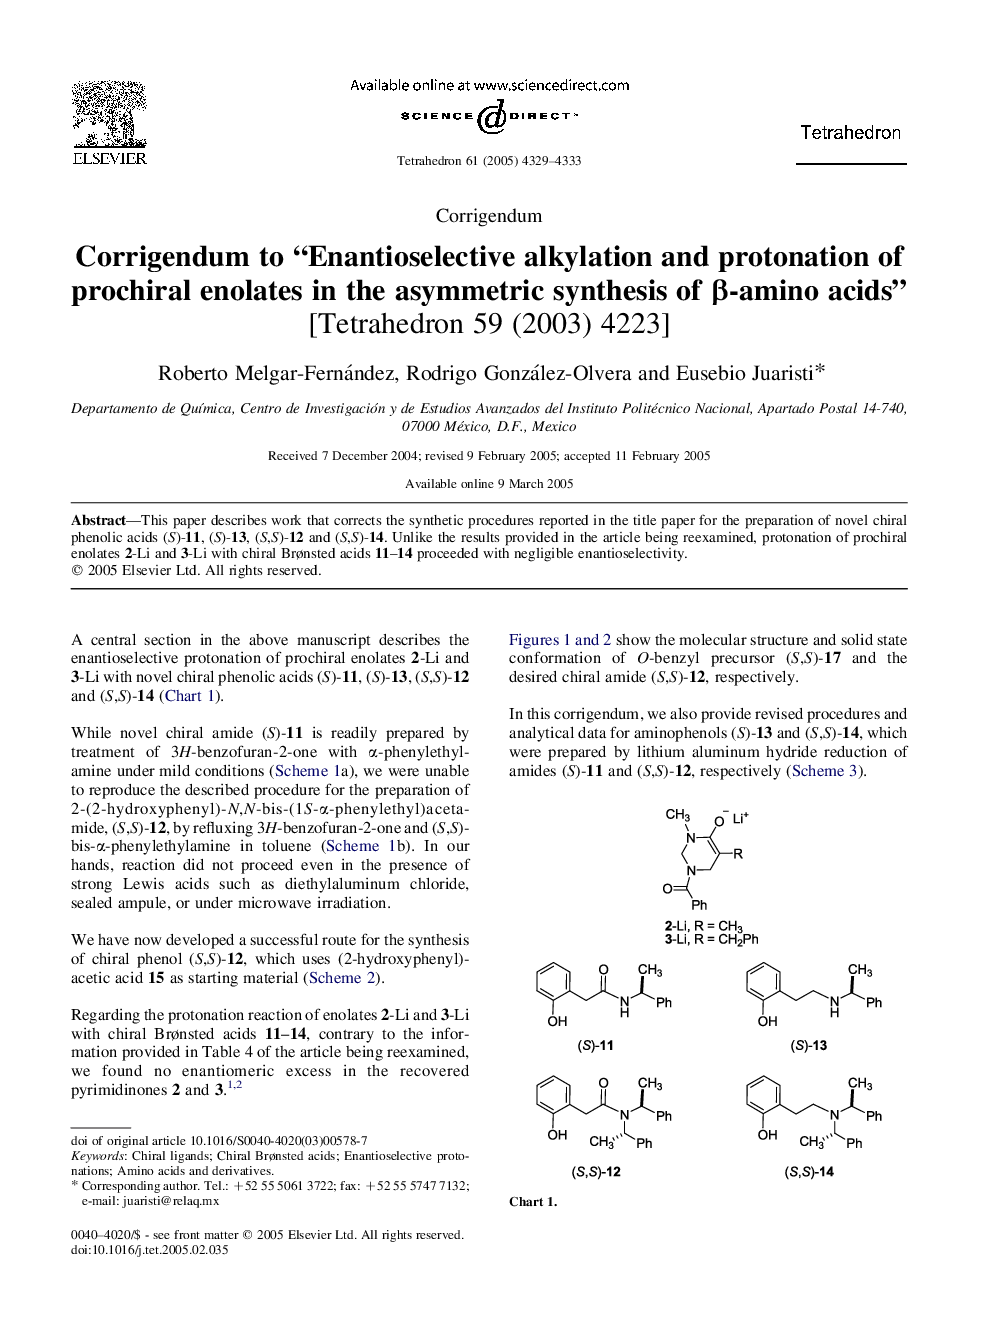 Corrigendum to “Enantioselective alkylation and protonation of prochiral enolates in the asymmetric synthesis of Î²-amino acids” [Tetrahedron 59 (2003) 4223]